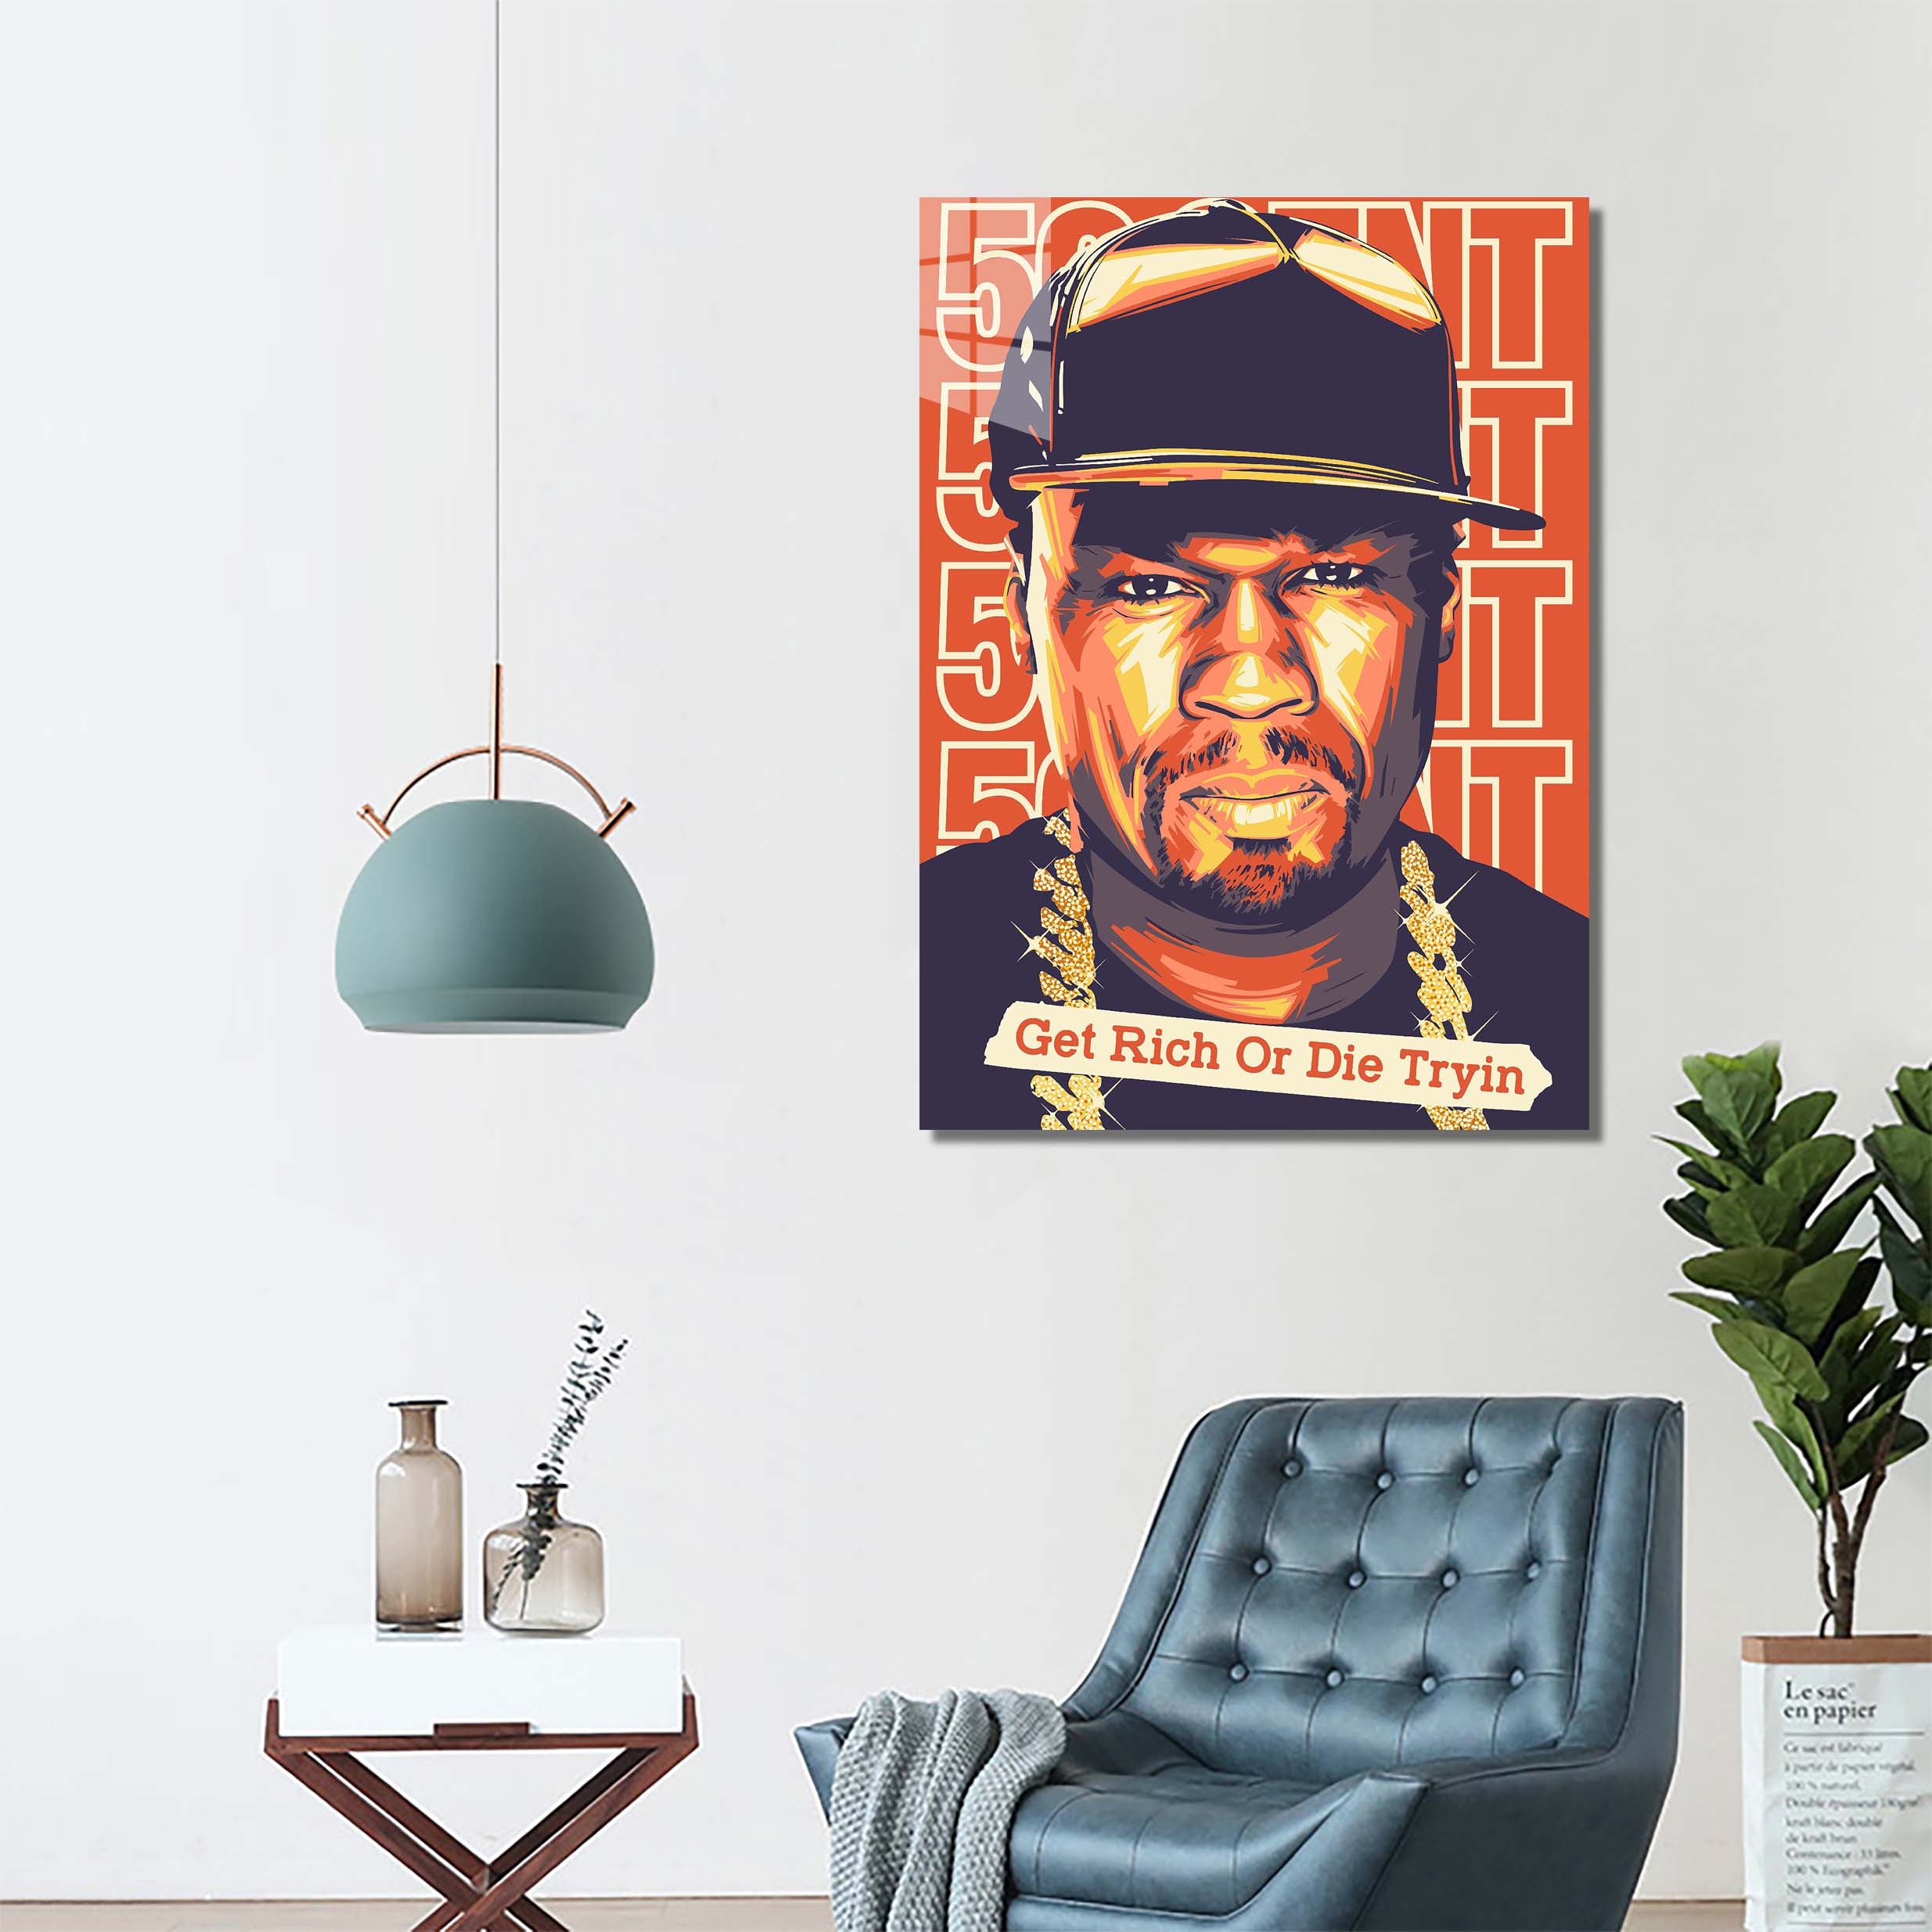 50 Cent v2-designed by @My Kido Art